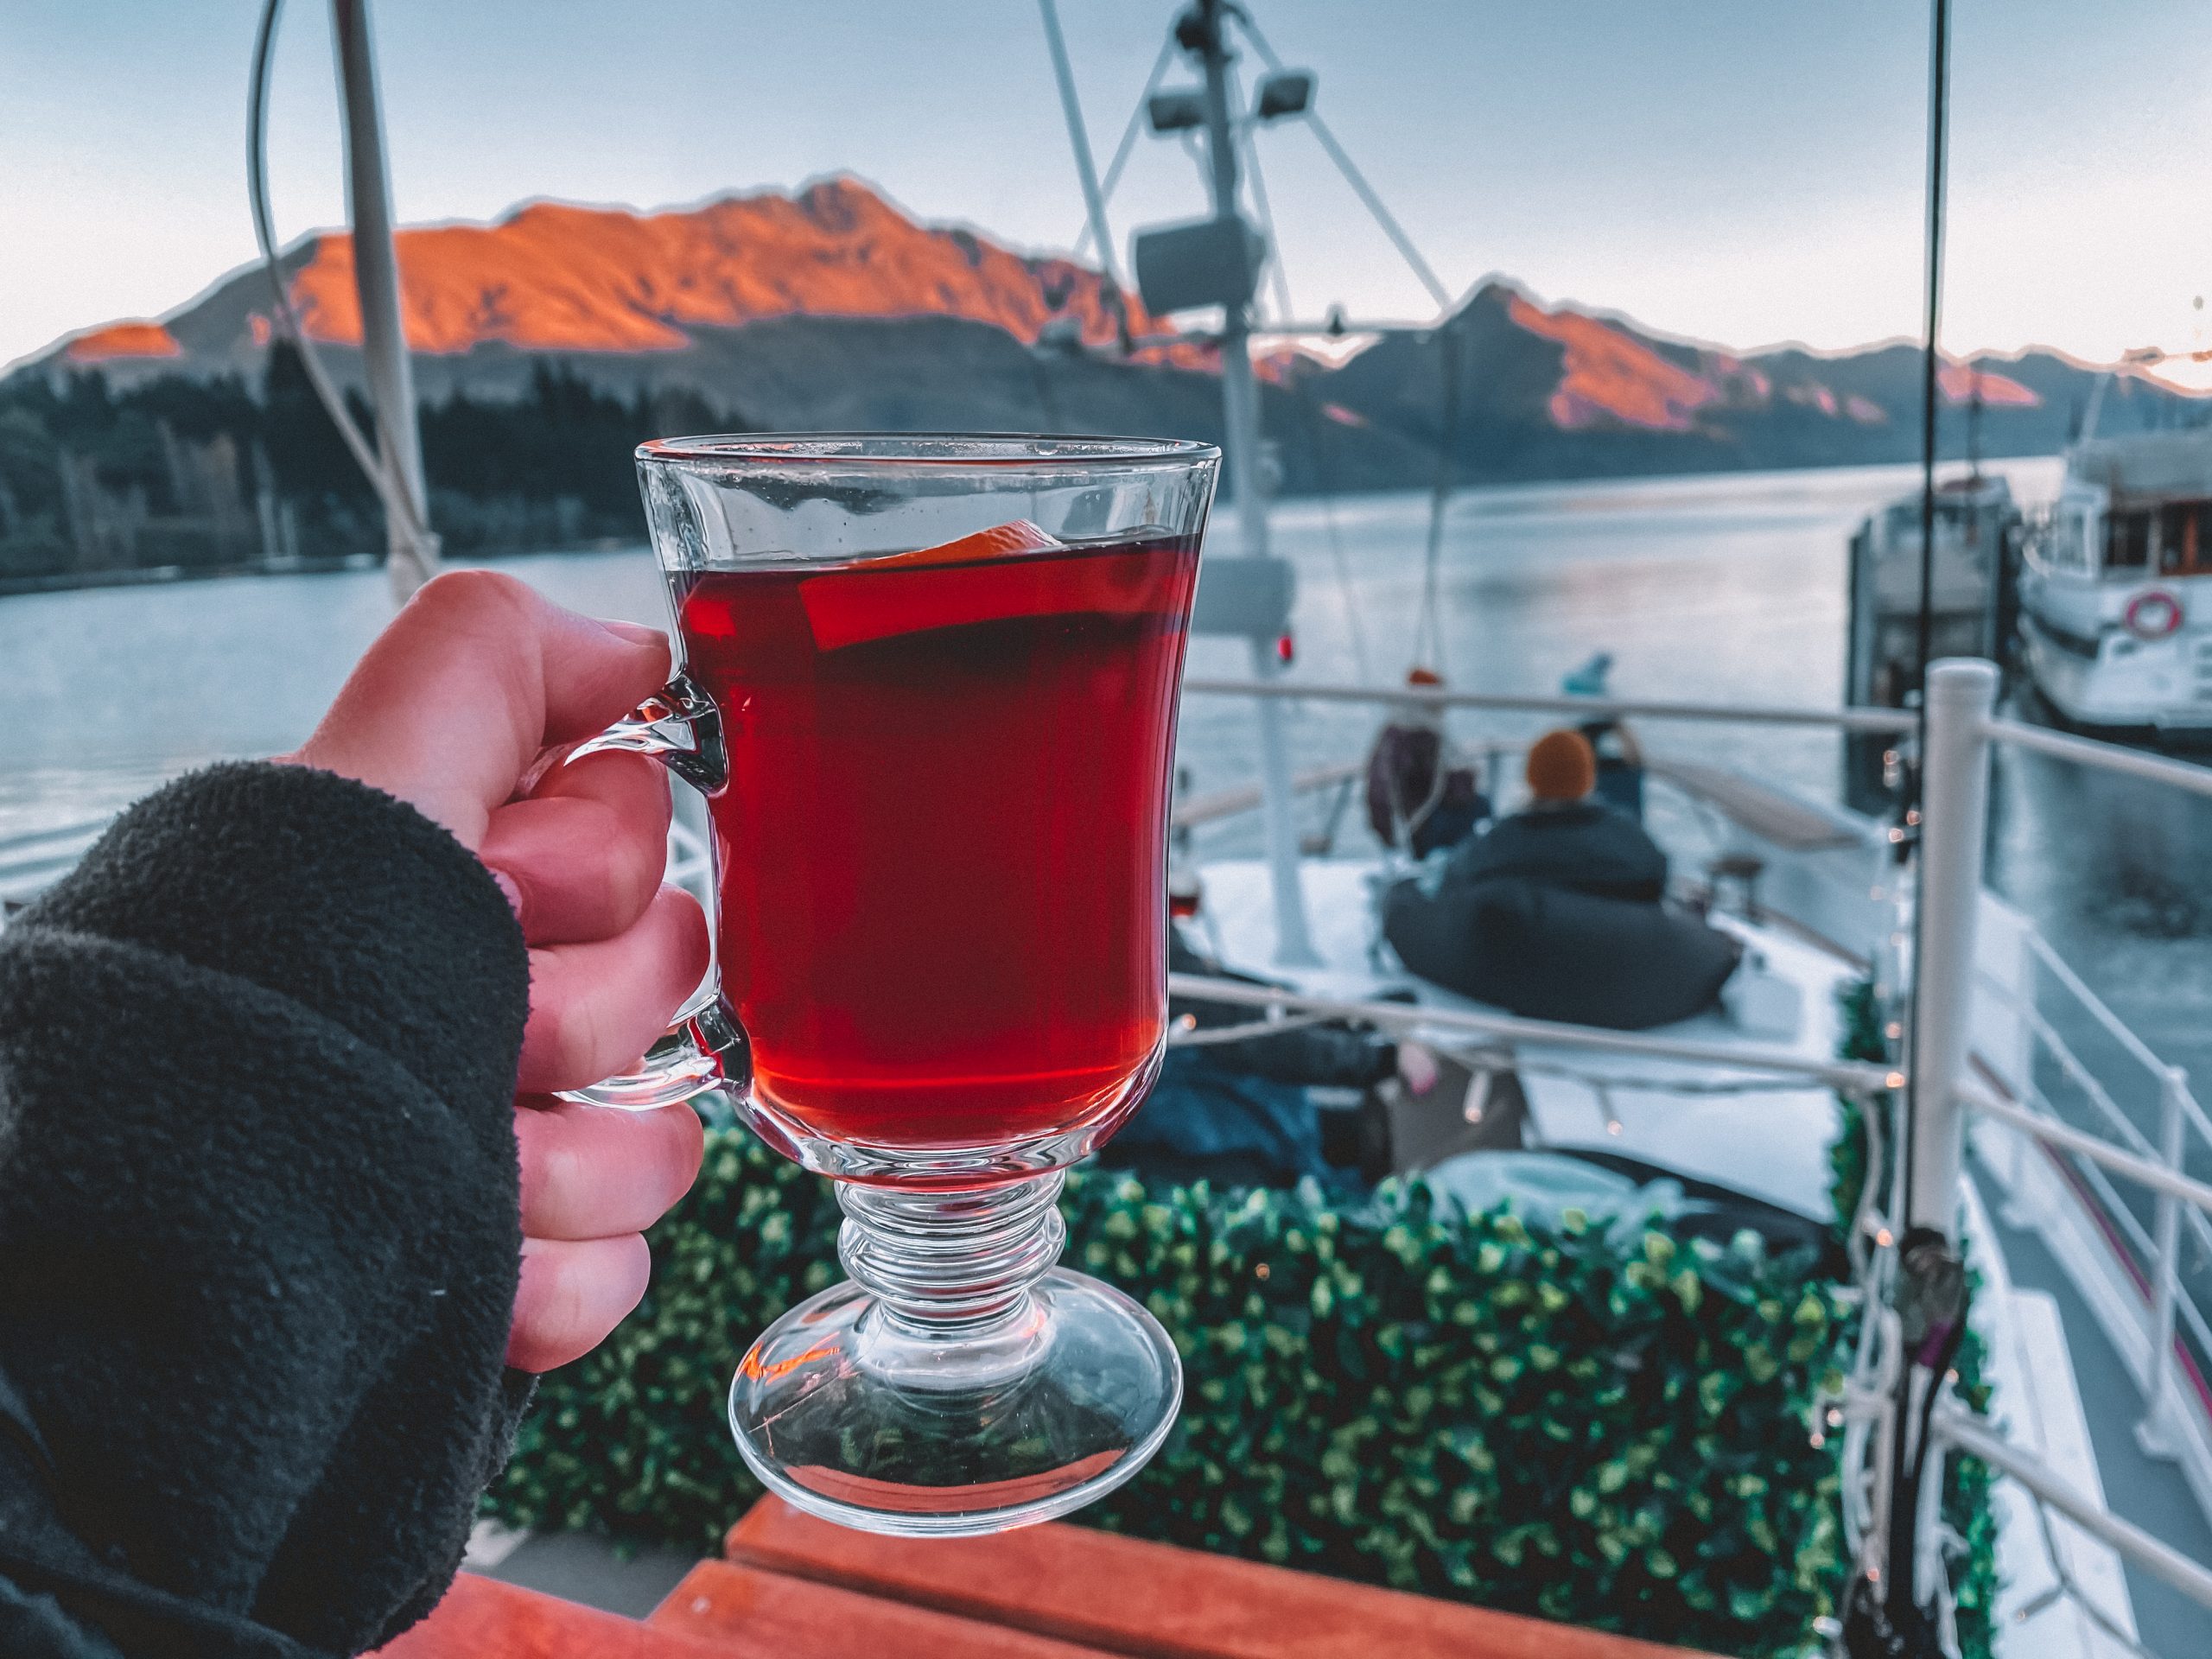 A hand holding a glass of mulled wine in a boat overlooking a lake, mountains and trees at sunset.